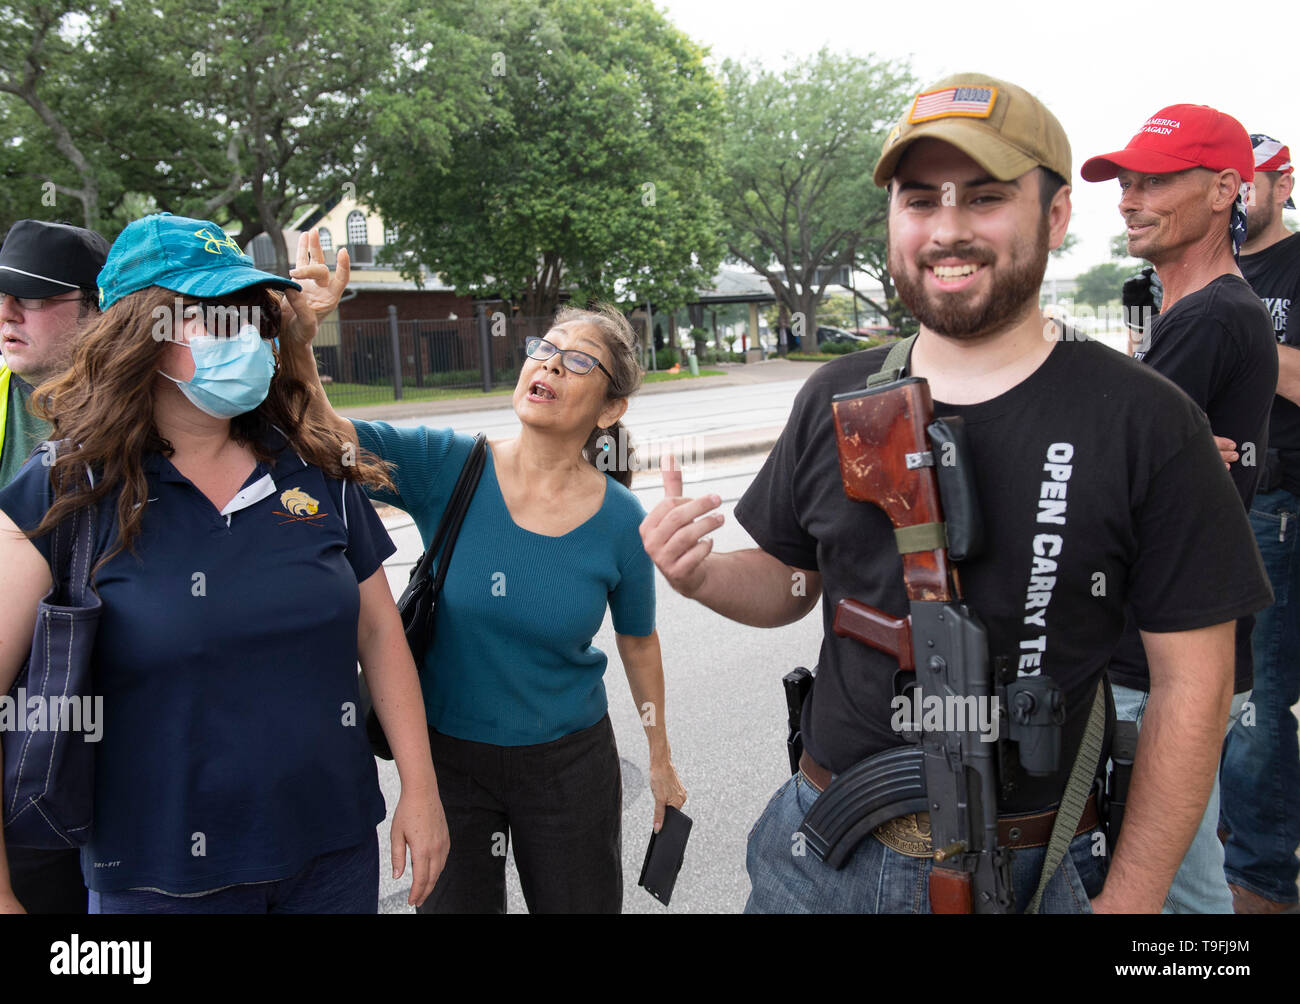 A supporter of Ilhan Omar (center) confronts anti-Muslim protesters, some opening carrying guns legally, outside an Austin, Texas, hotel where the controversial Muslim Congresswoman spoke at a city-wide iftar dinner. Stock Photo